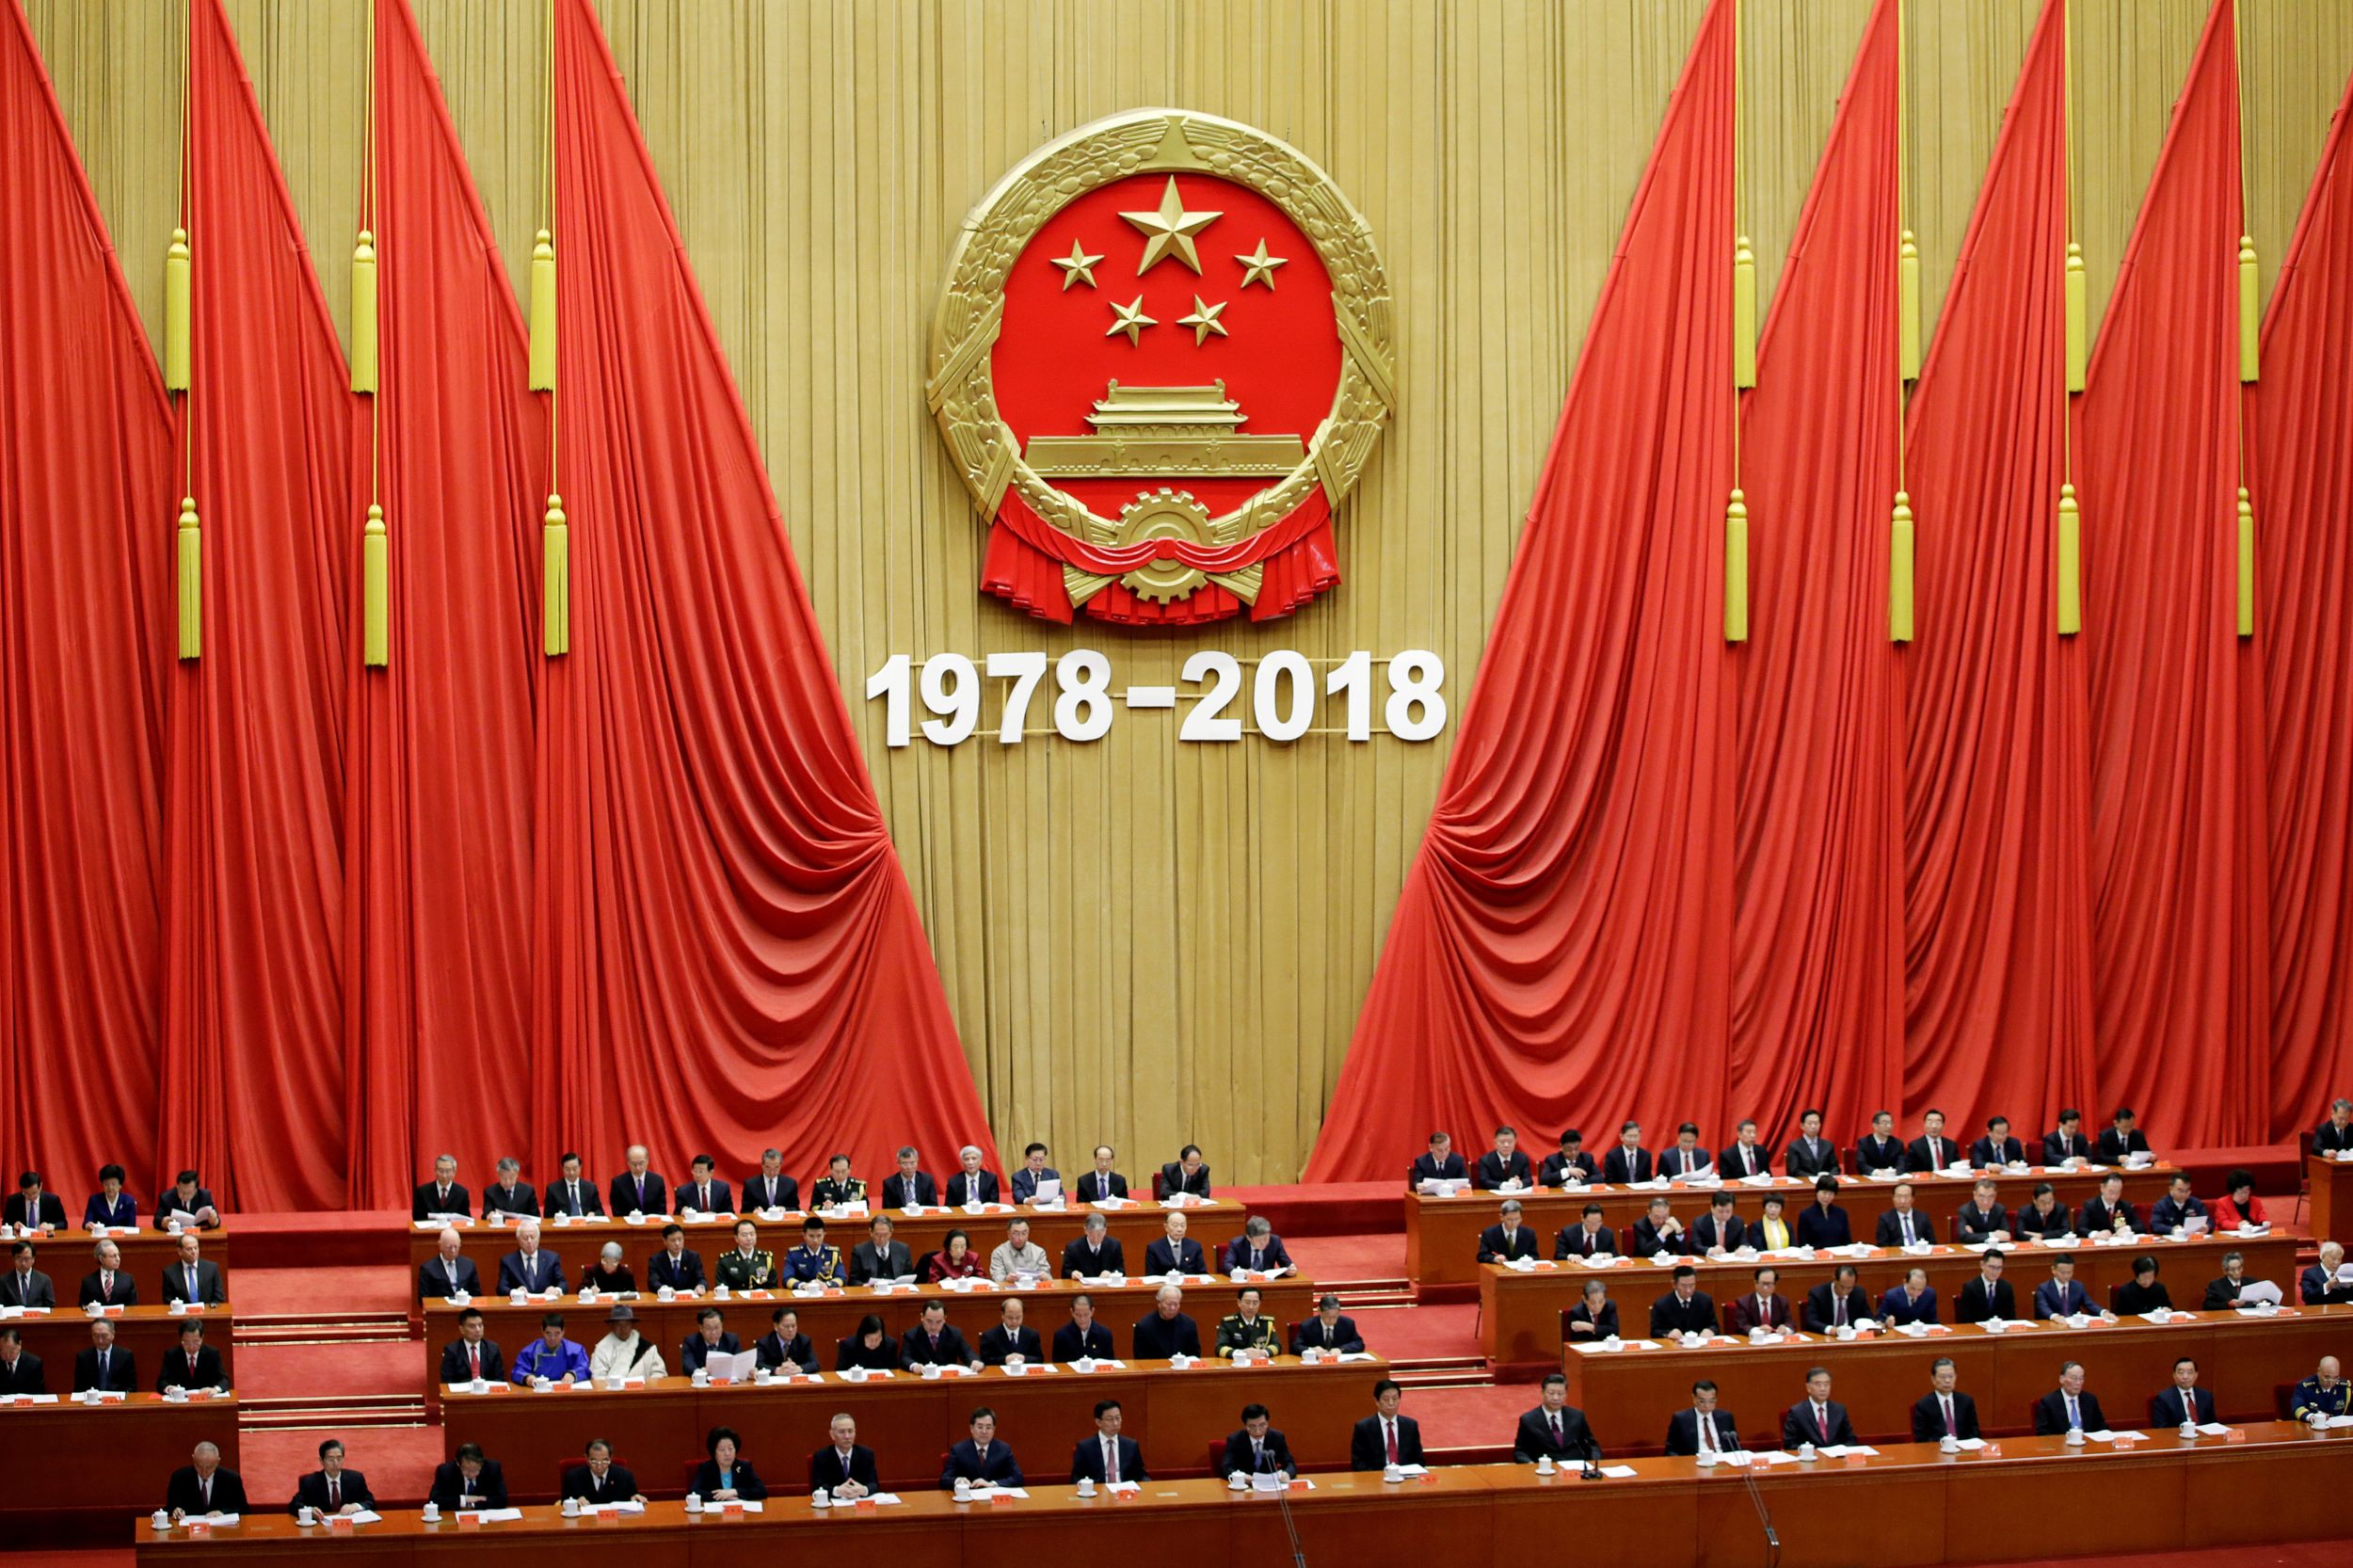 China: Reforms Is So Forty Years Ago